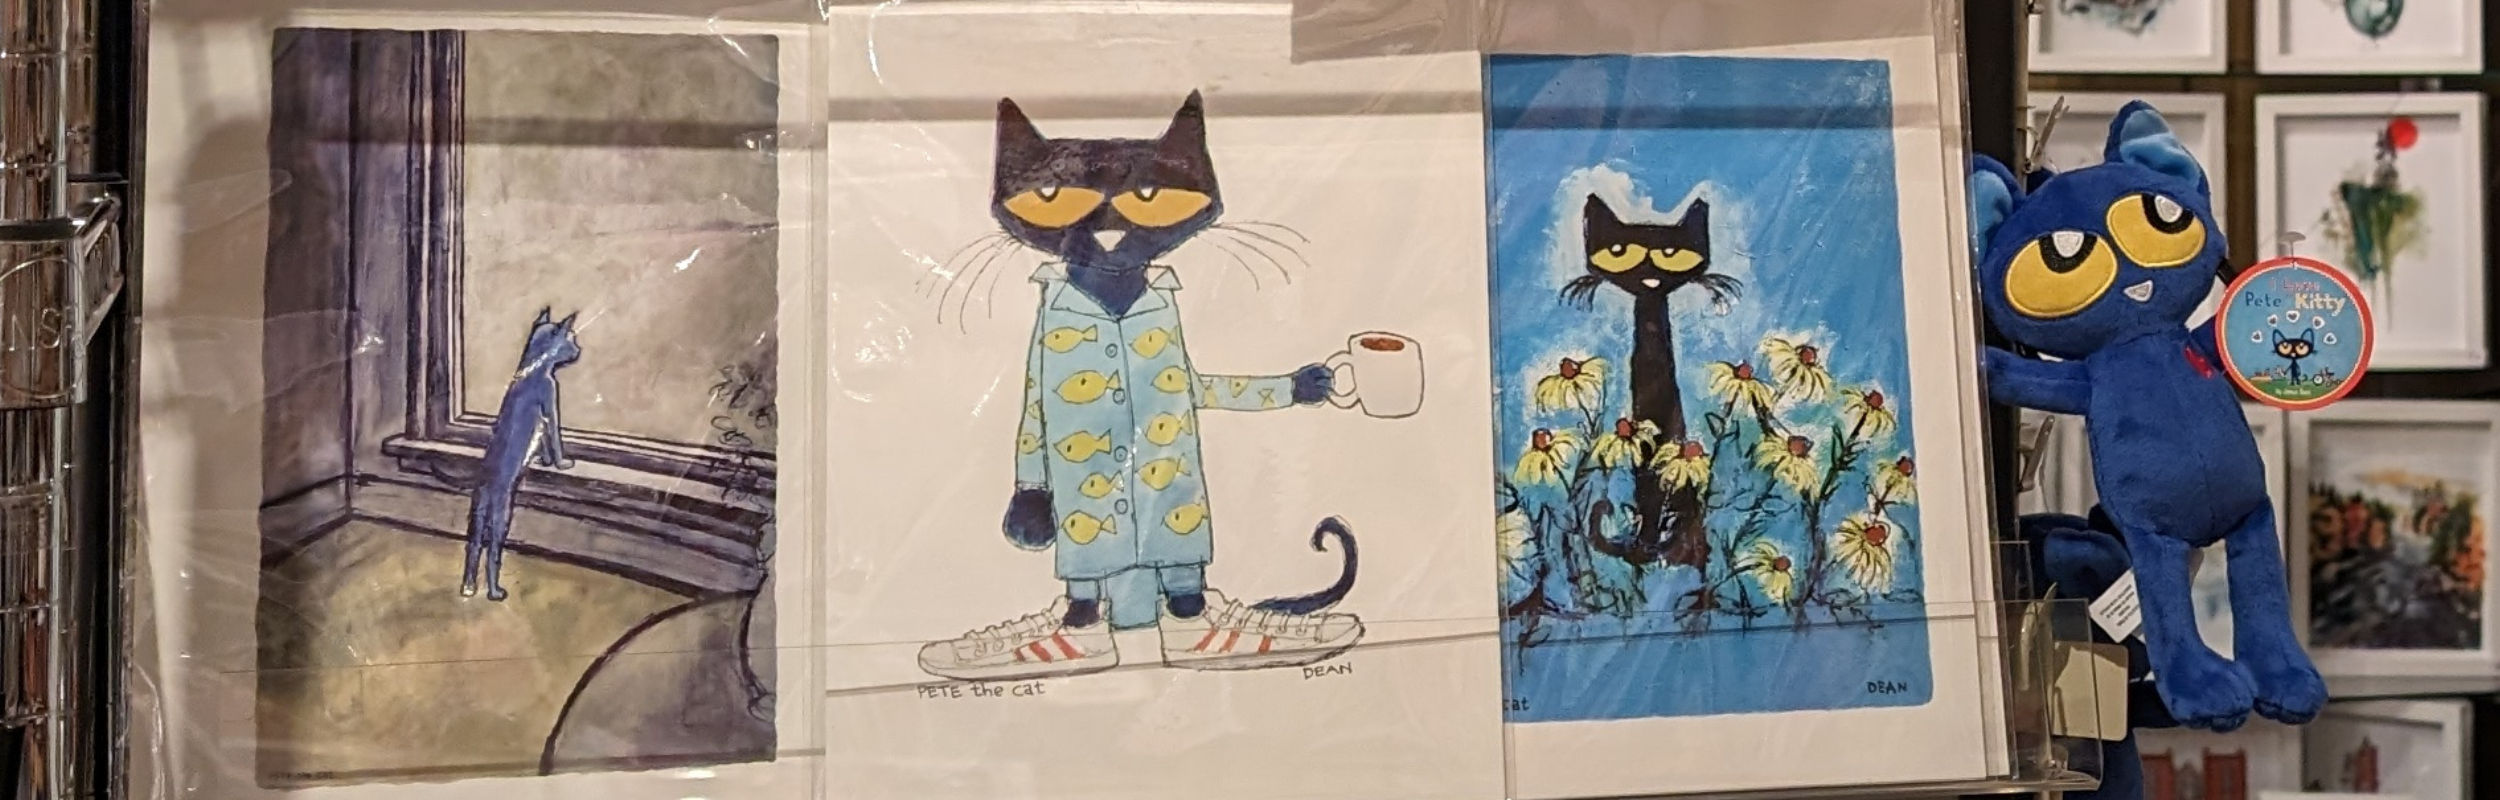 Pete the Cat prints on a clear shelf